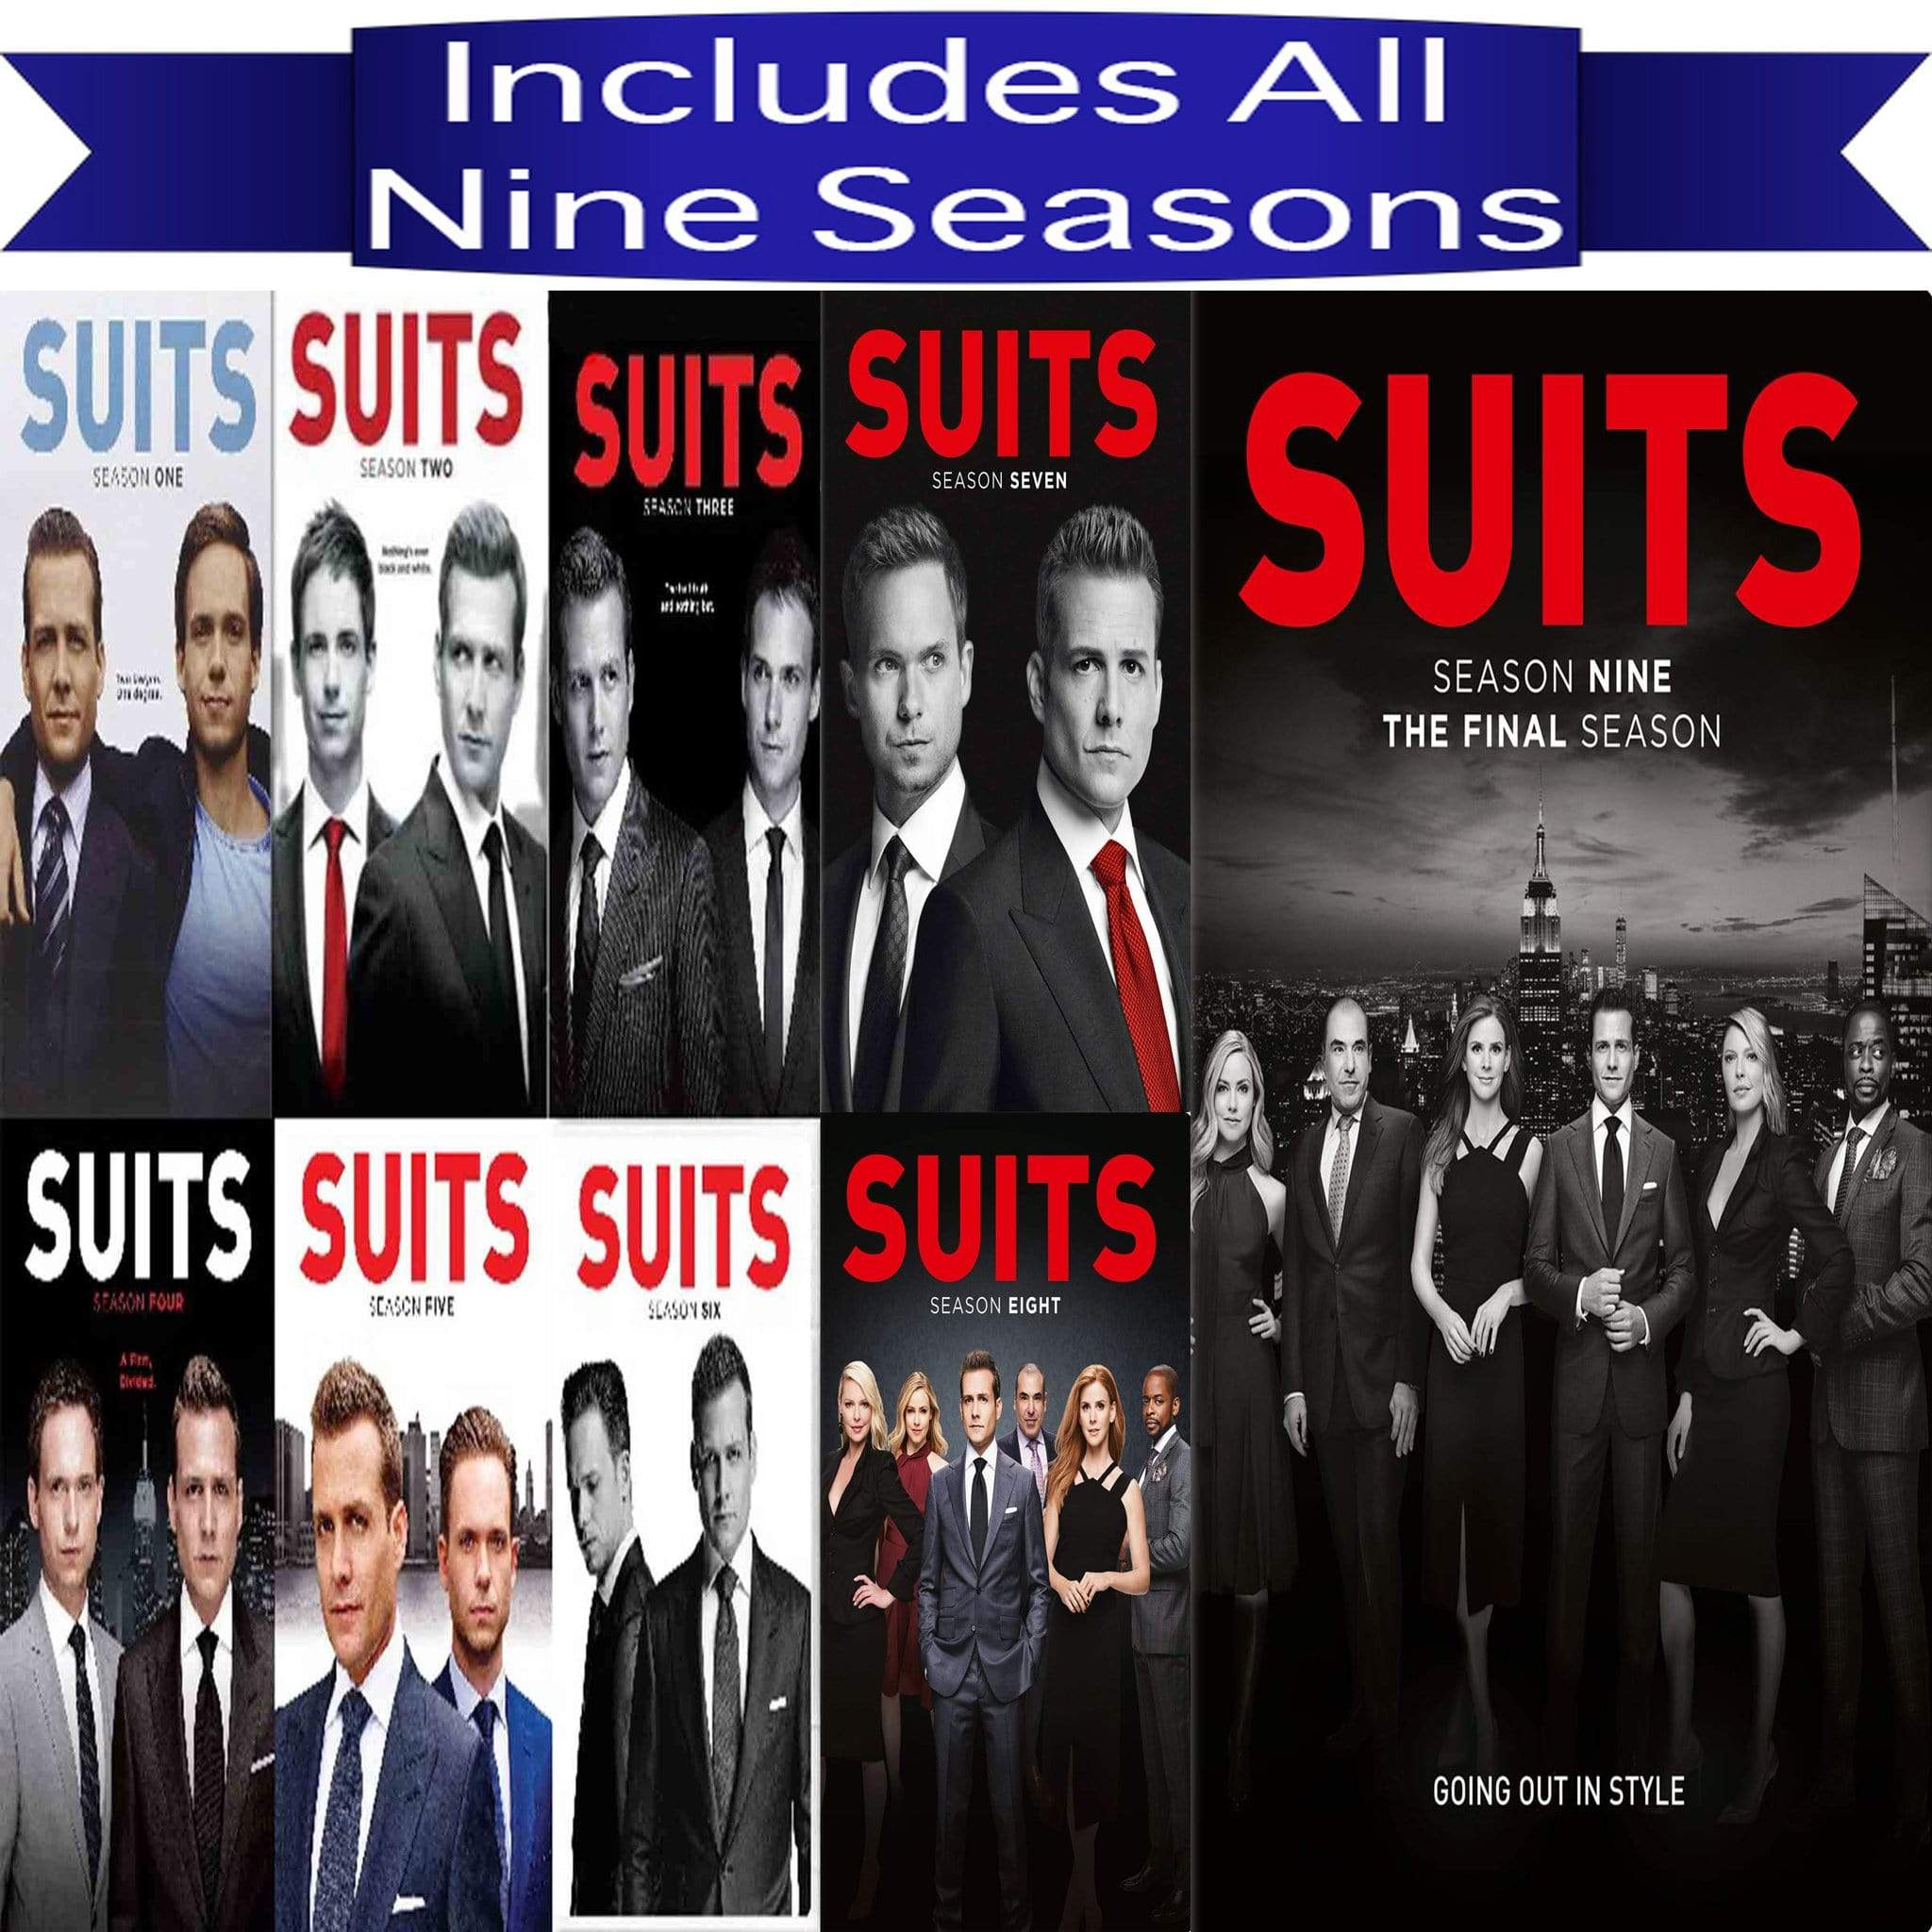 Suits (2013) • Season 3 Posters + Title Cards : r/PlexPosters